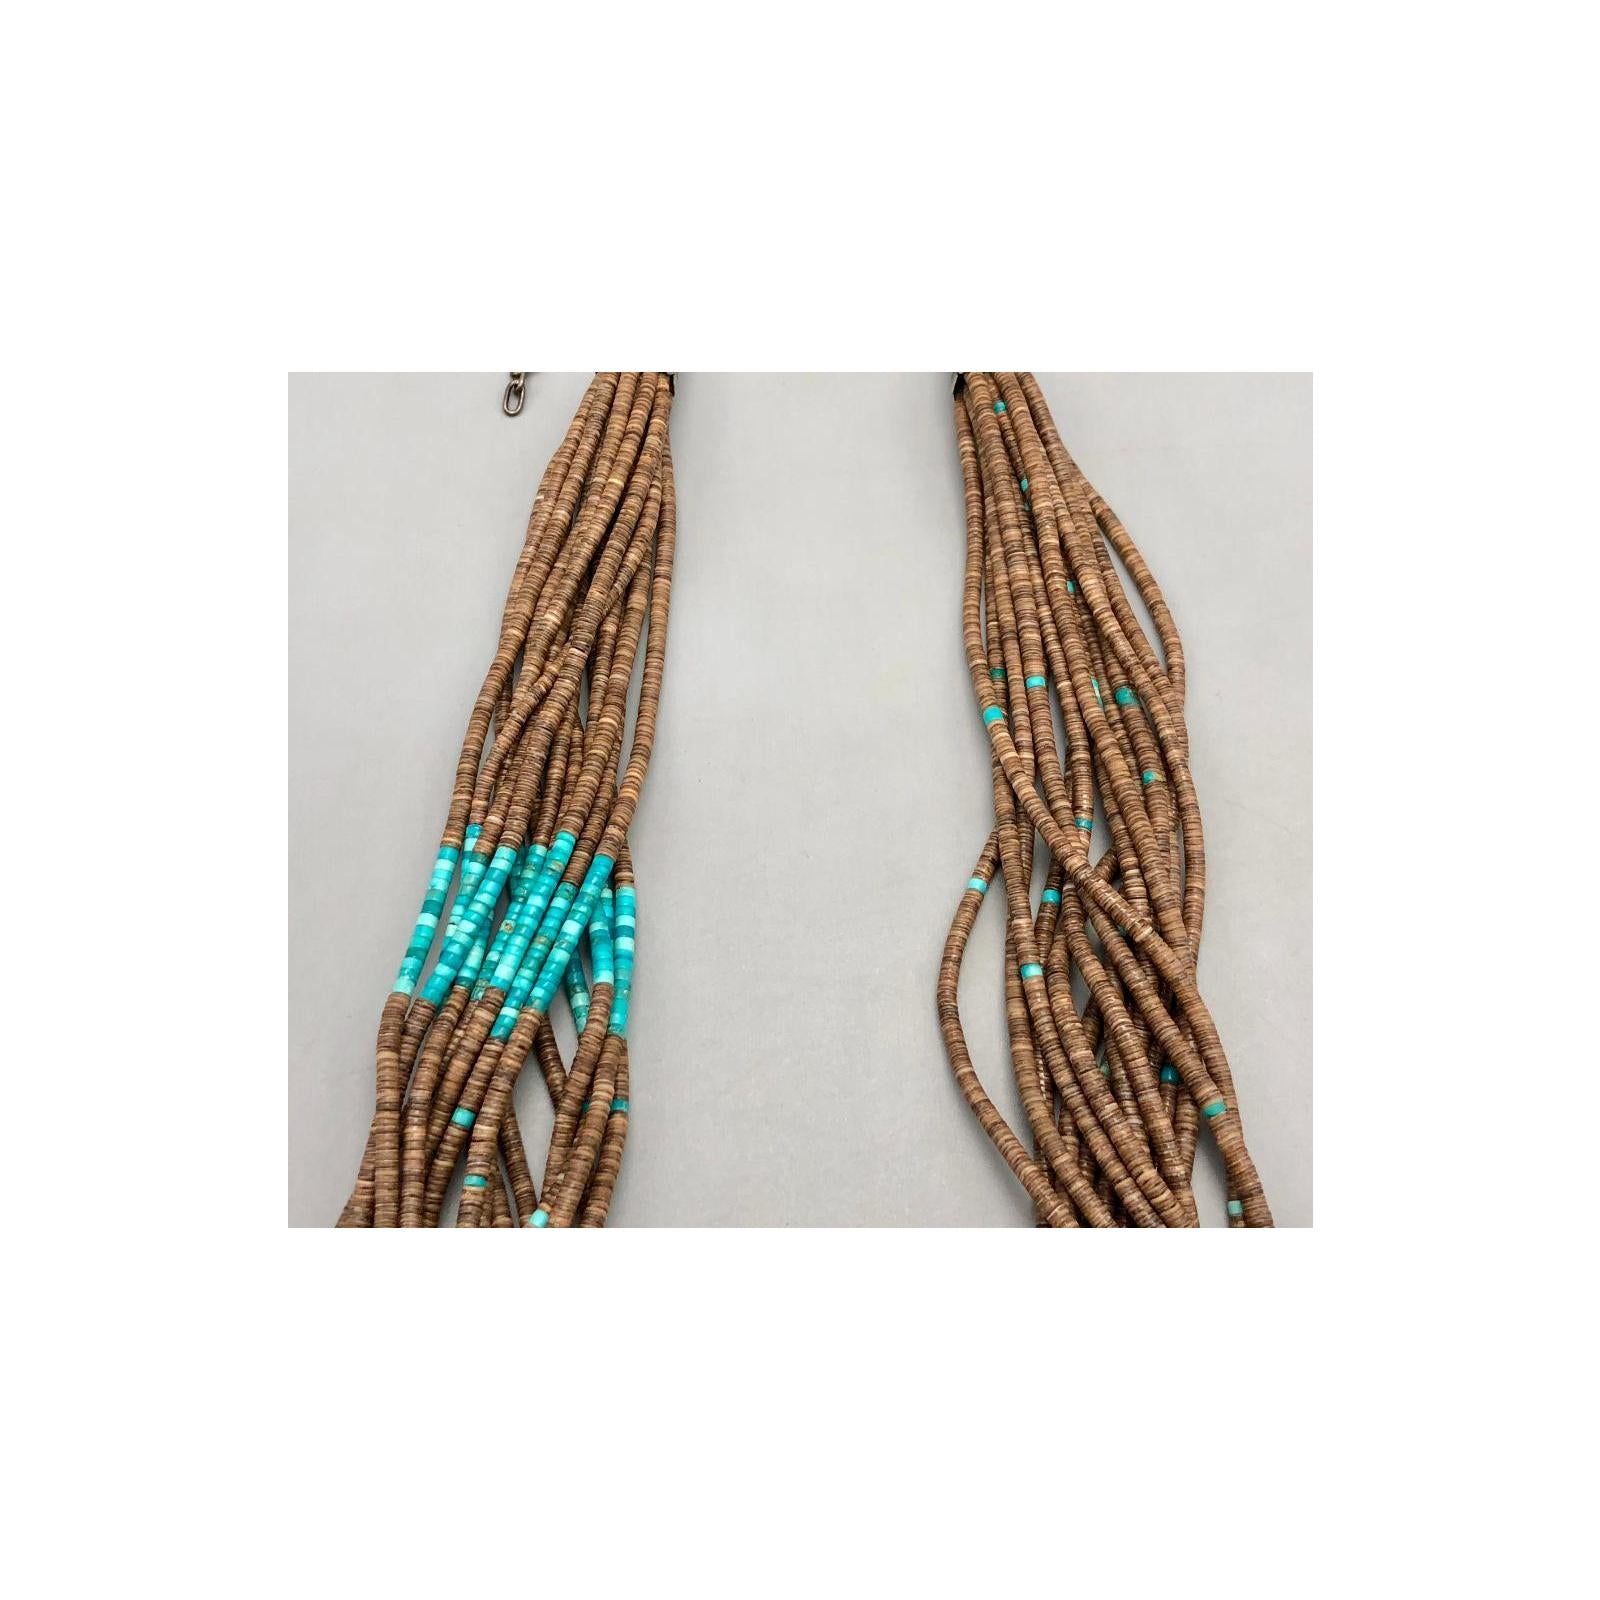 15-strand heishi and turquoise vintage necklace.